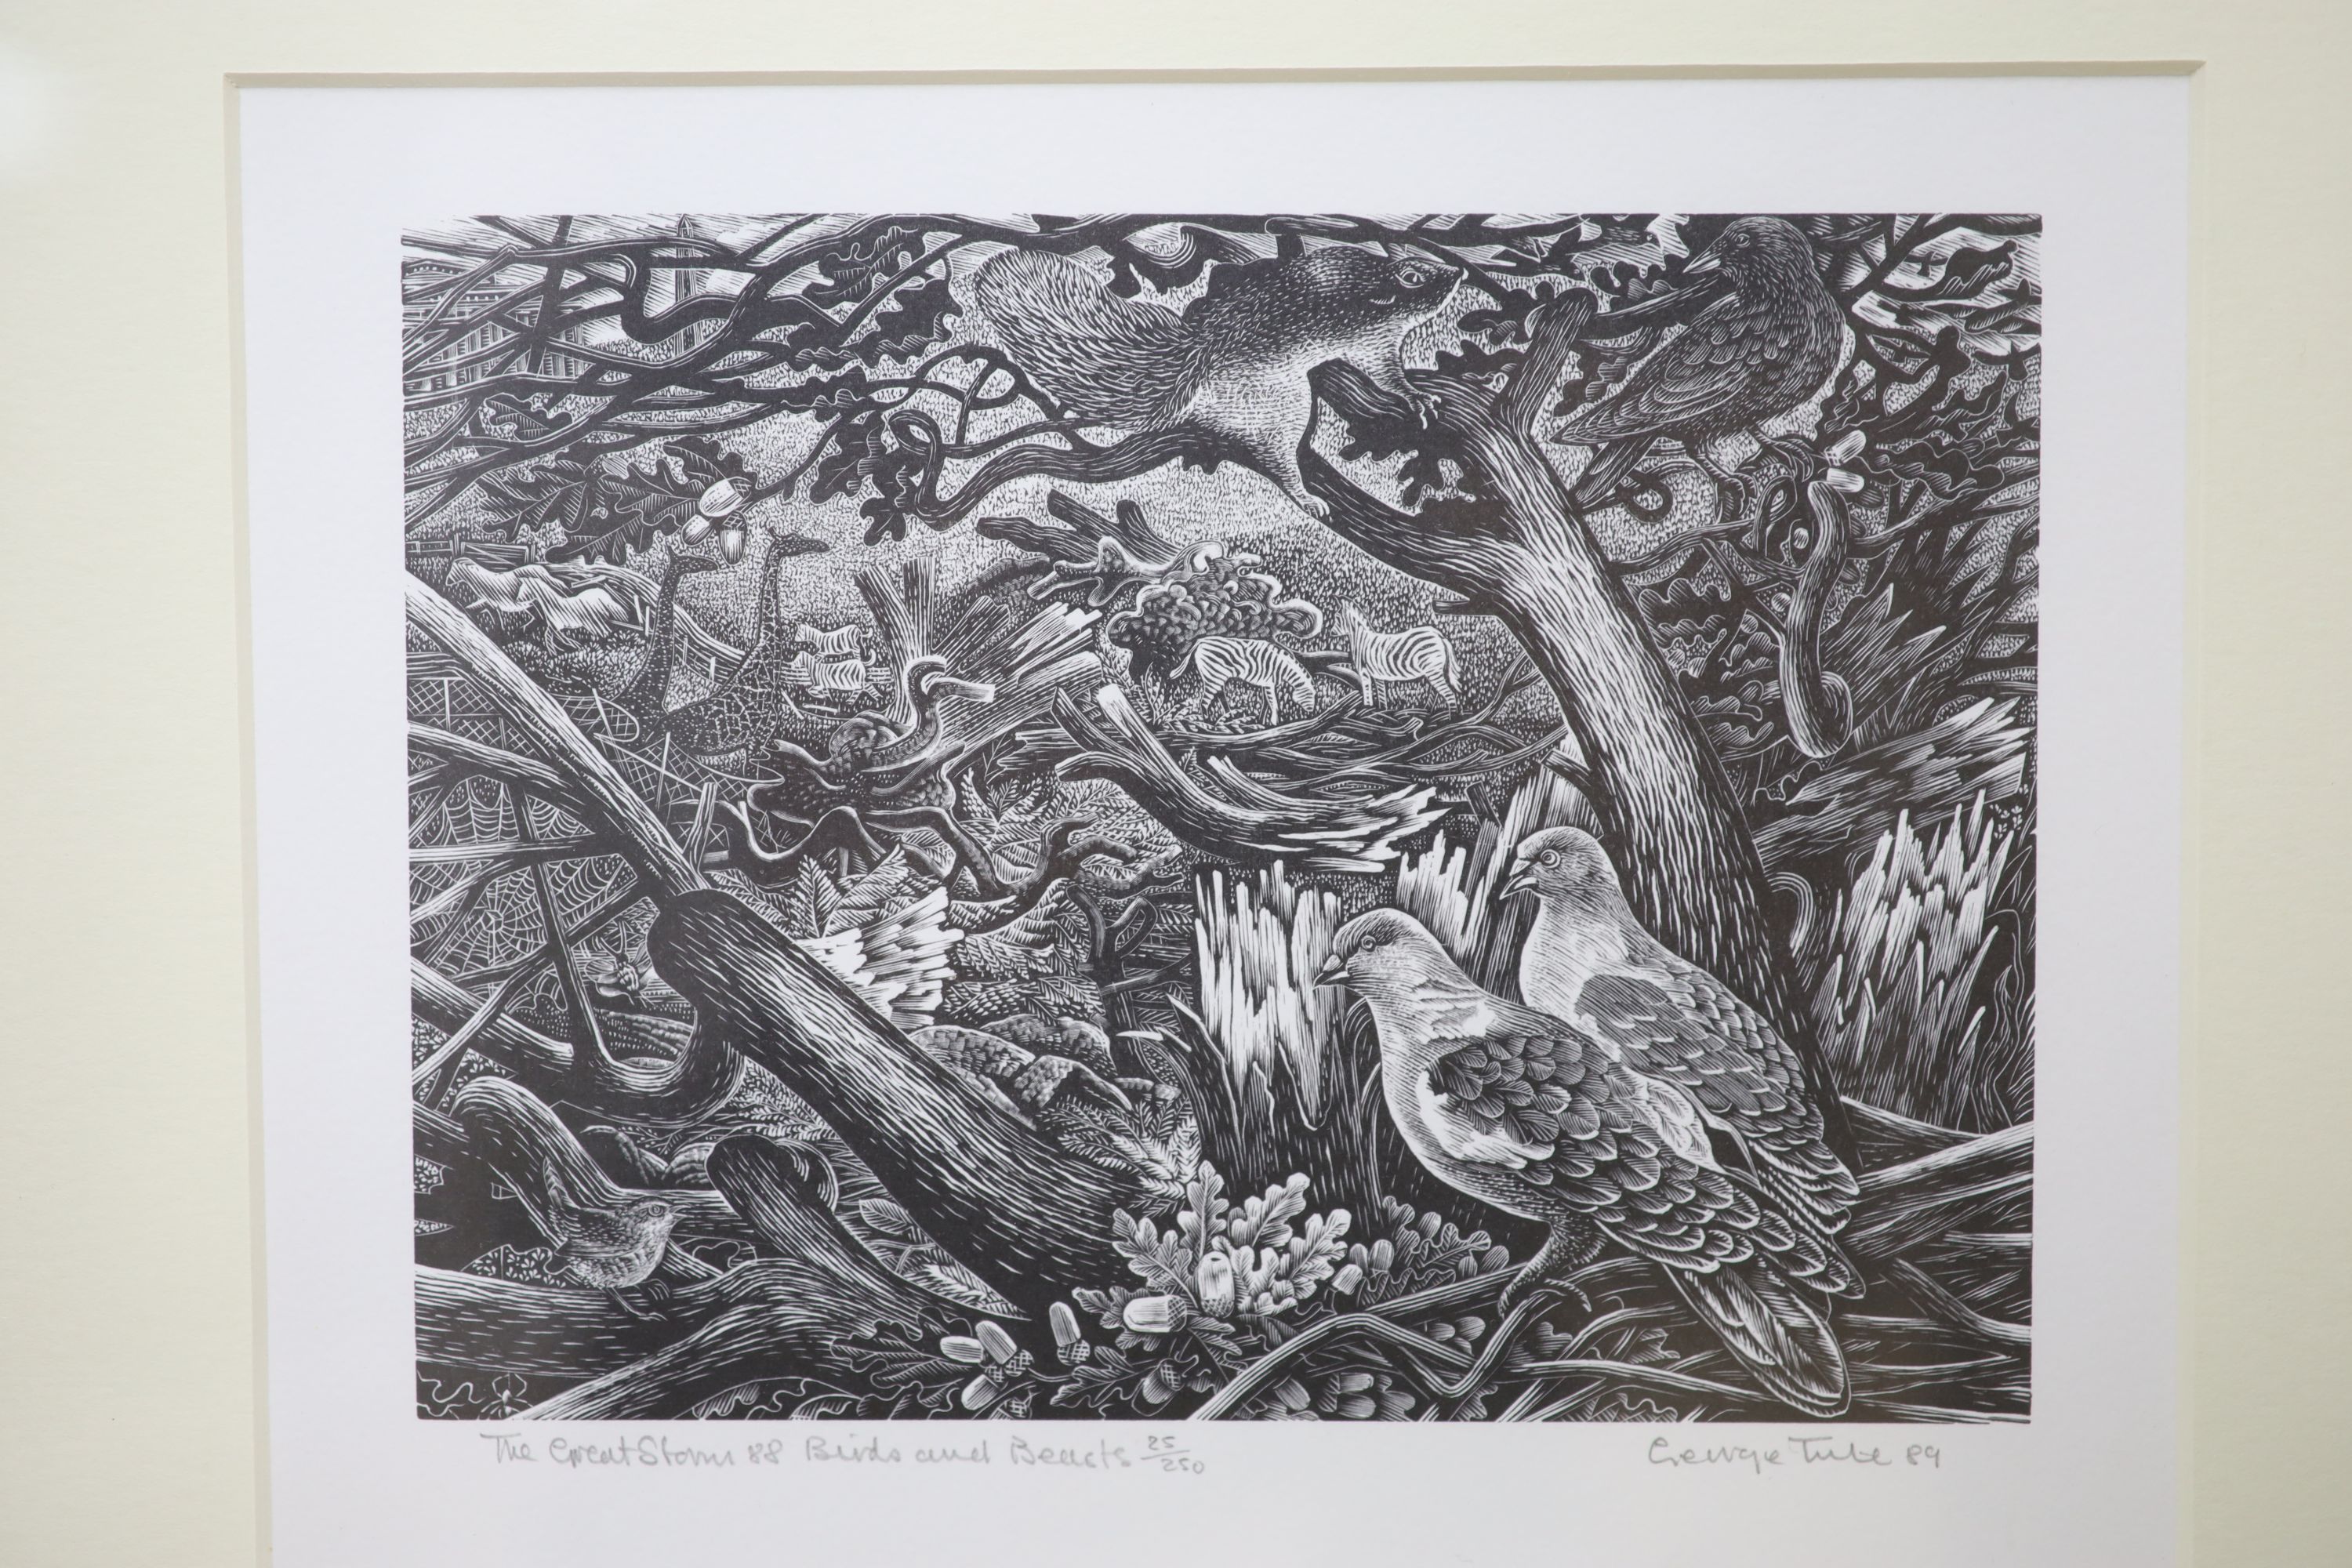 Seven assorted near contemporary wood engravings by George Tute, Monica Poole, Peter Reddick, Peter S. Smith, Claire Bulby and AC Garrett, largest 50 x 25cm